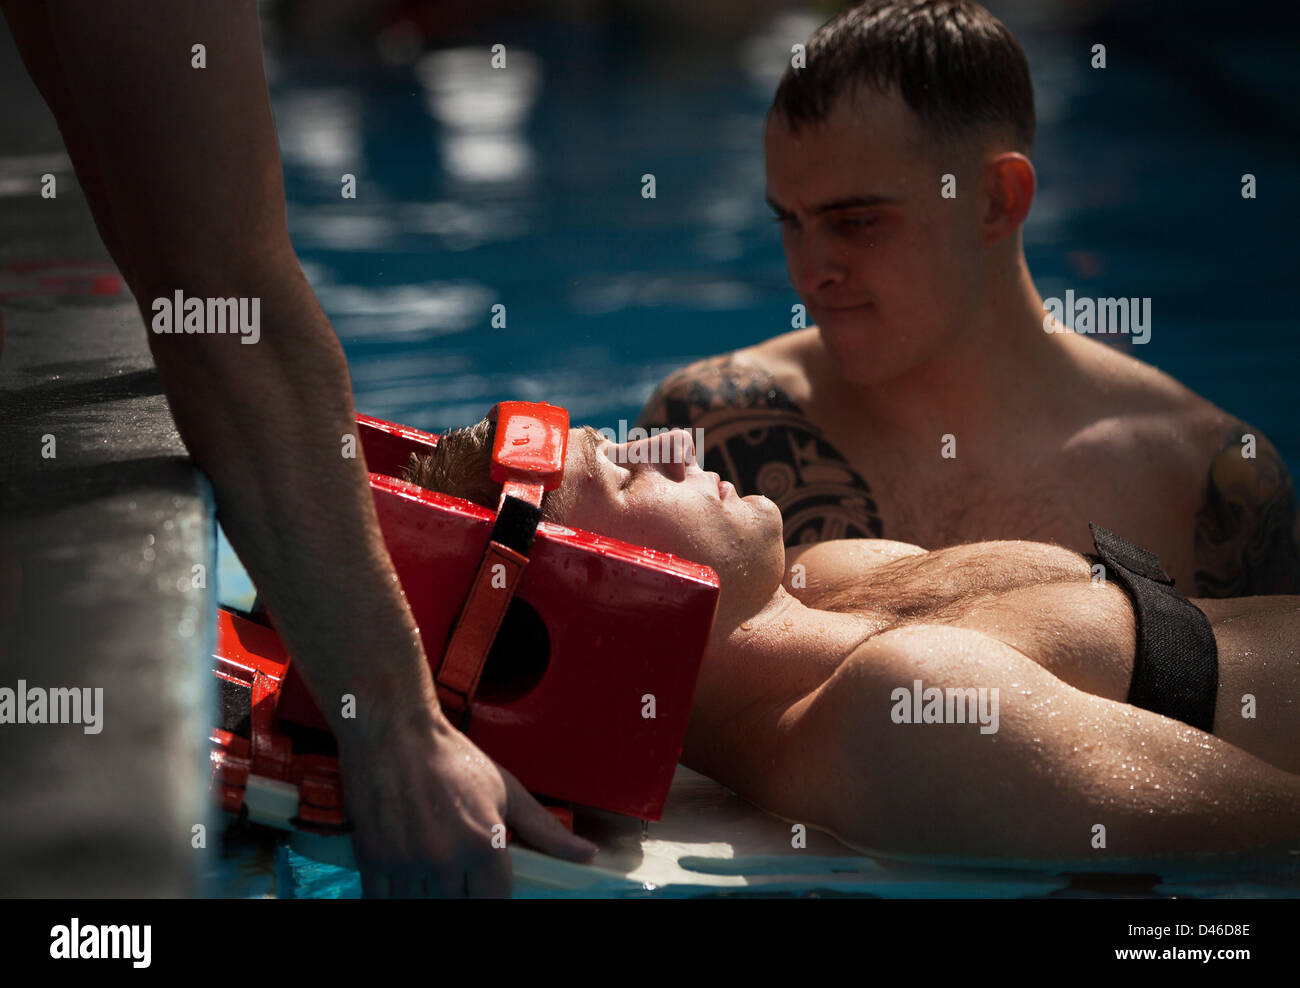 A US Marine instructor demonstrates the proper technique for treating head, neck and spinal injuries in the water during Marine Corps Swim Instructor Course March 5, 2013 at Marine Corps Base Camp Lejeune, NC. Stock Photo